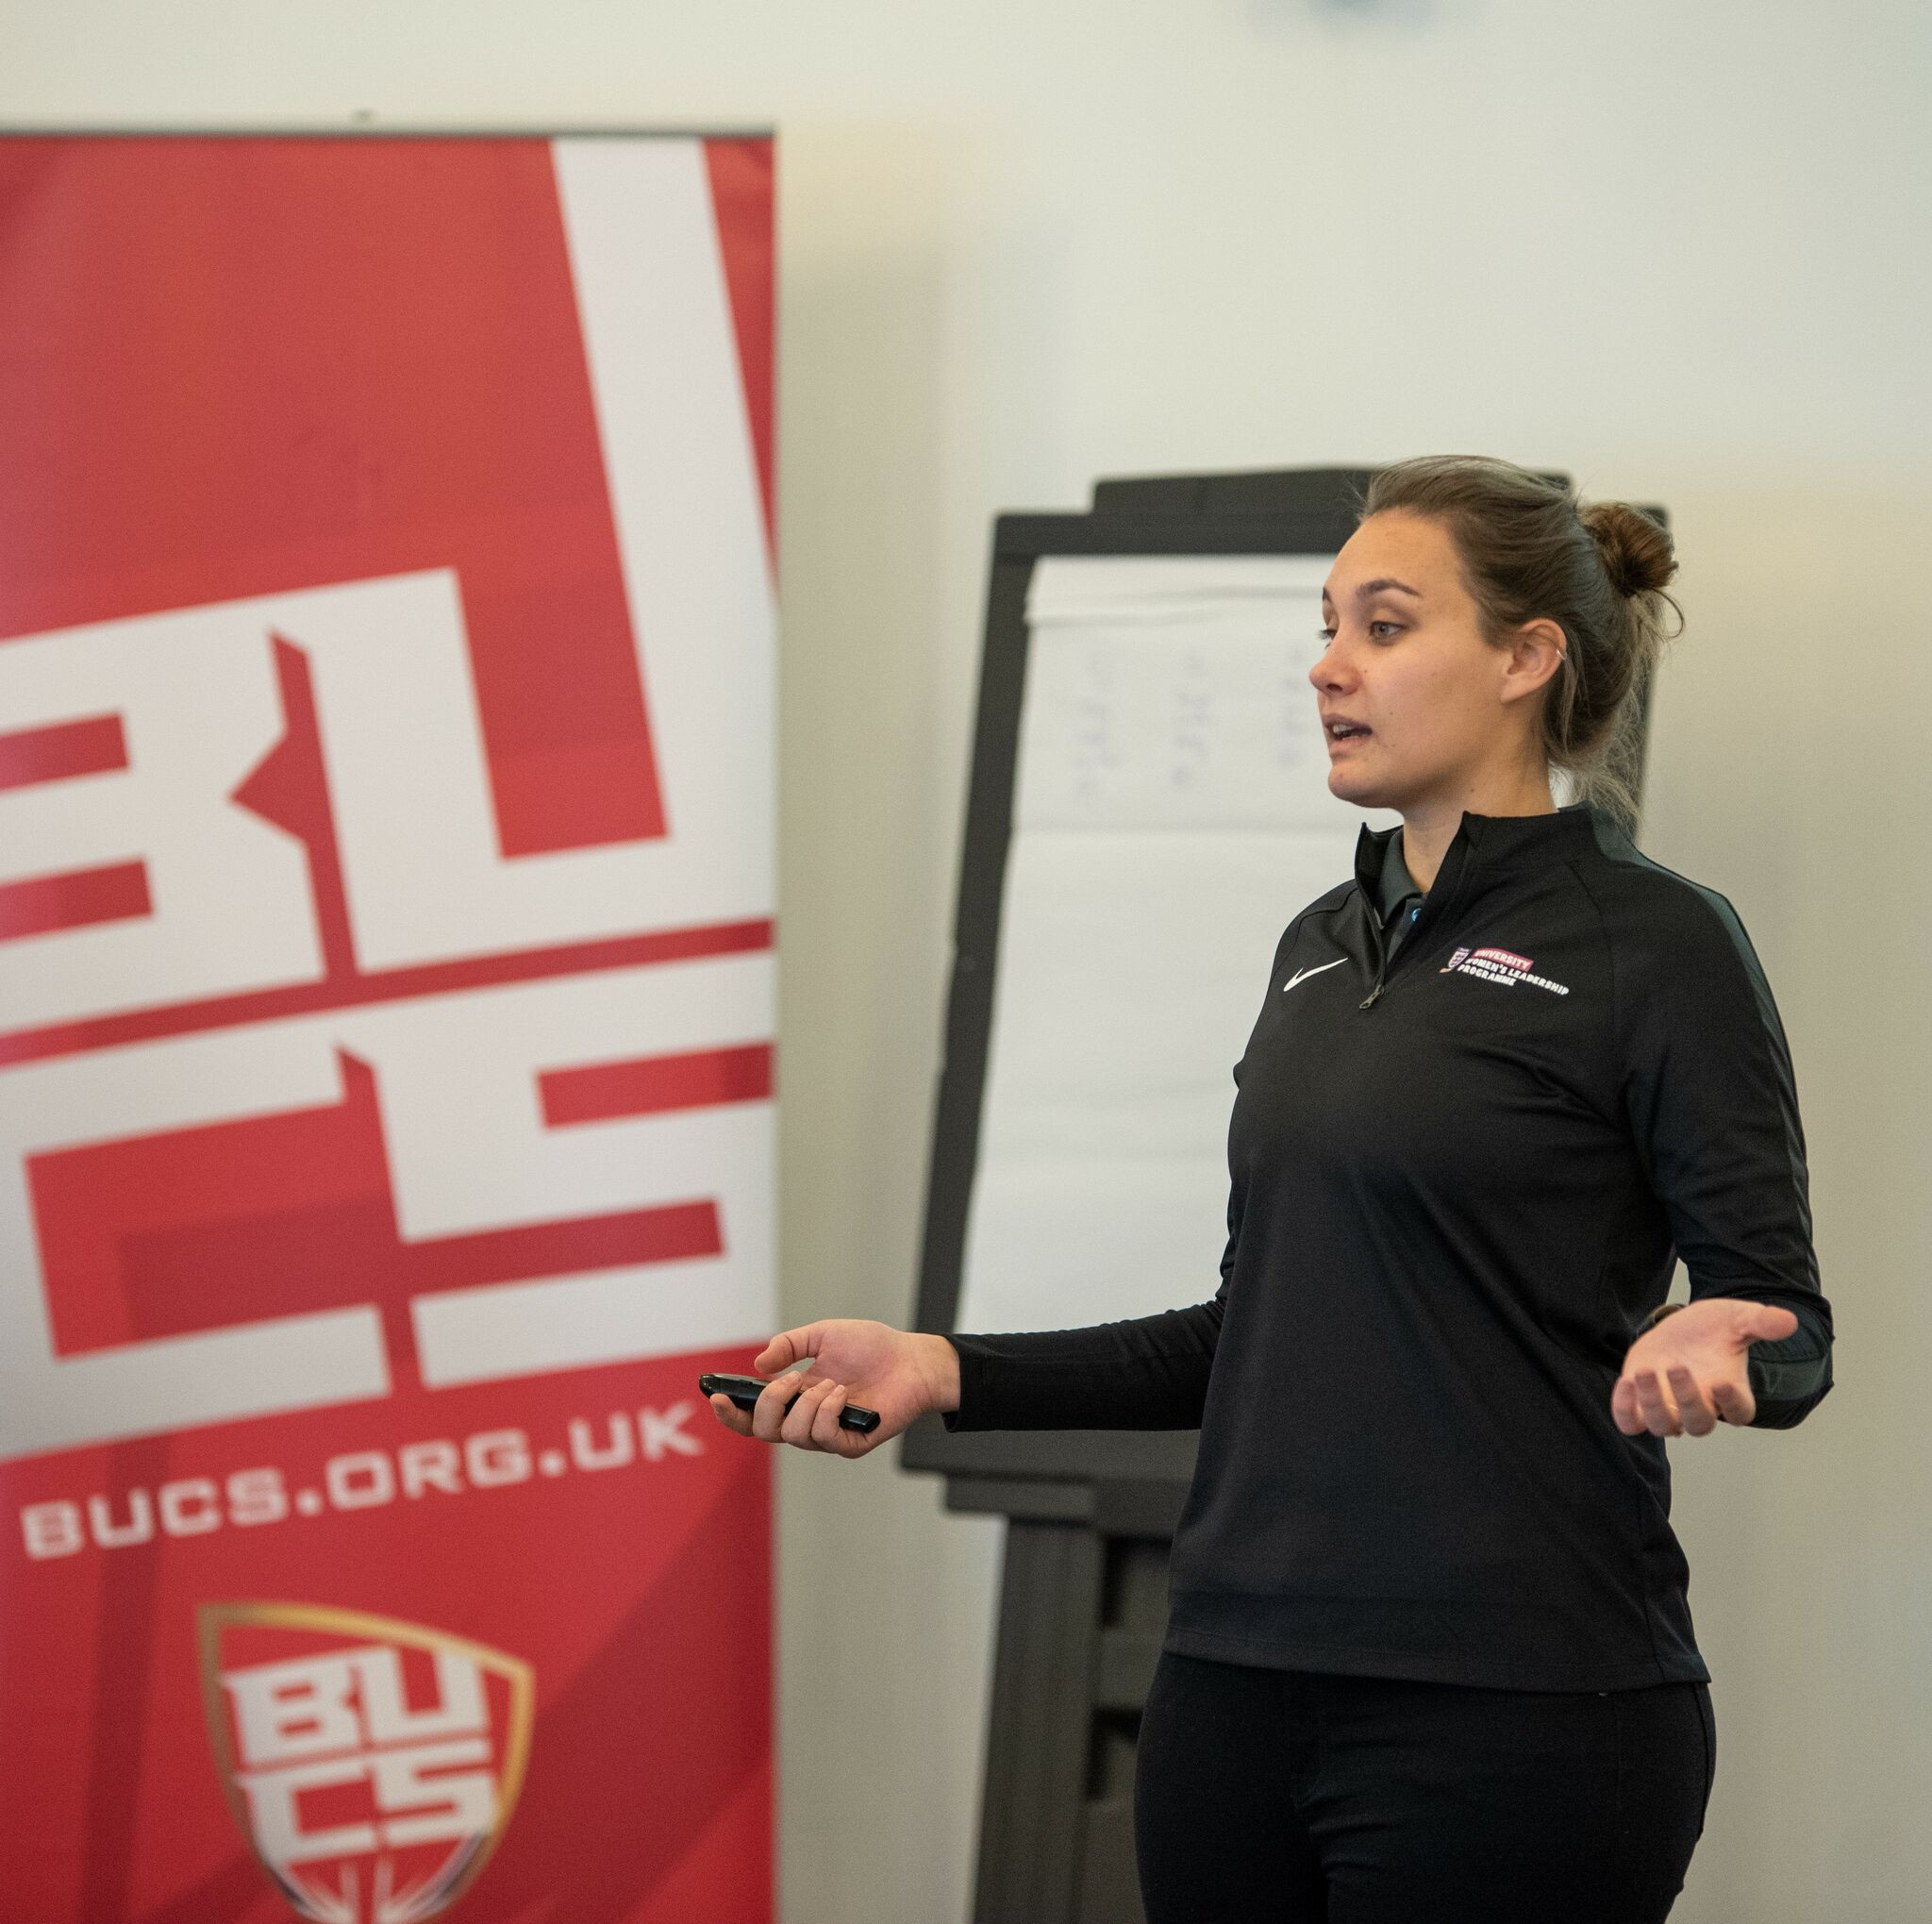 Beth Garner has been nominated for her role in increasing female participation in football within the British universities ©FISU